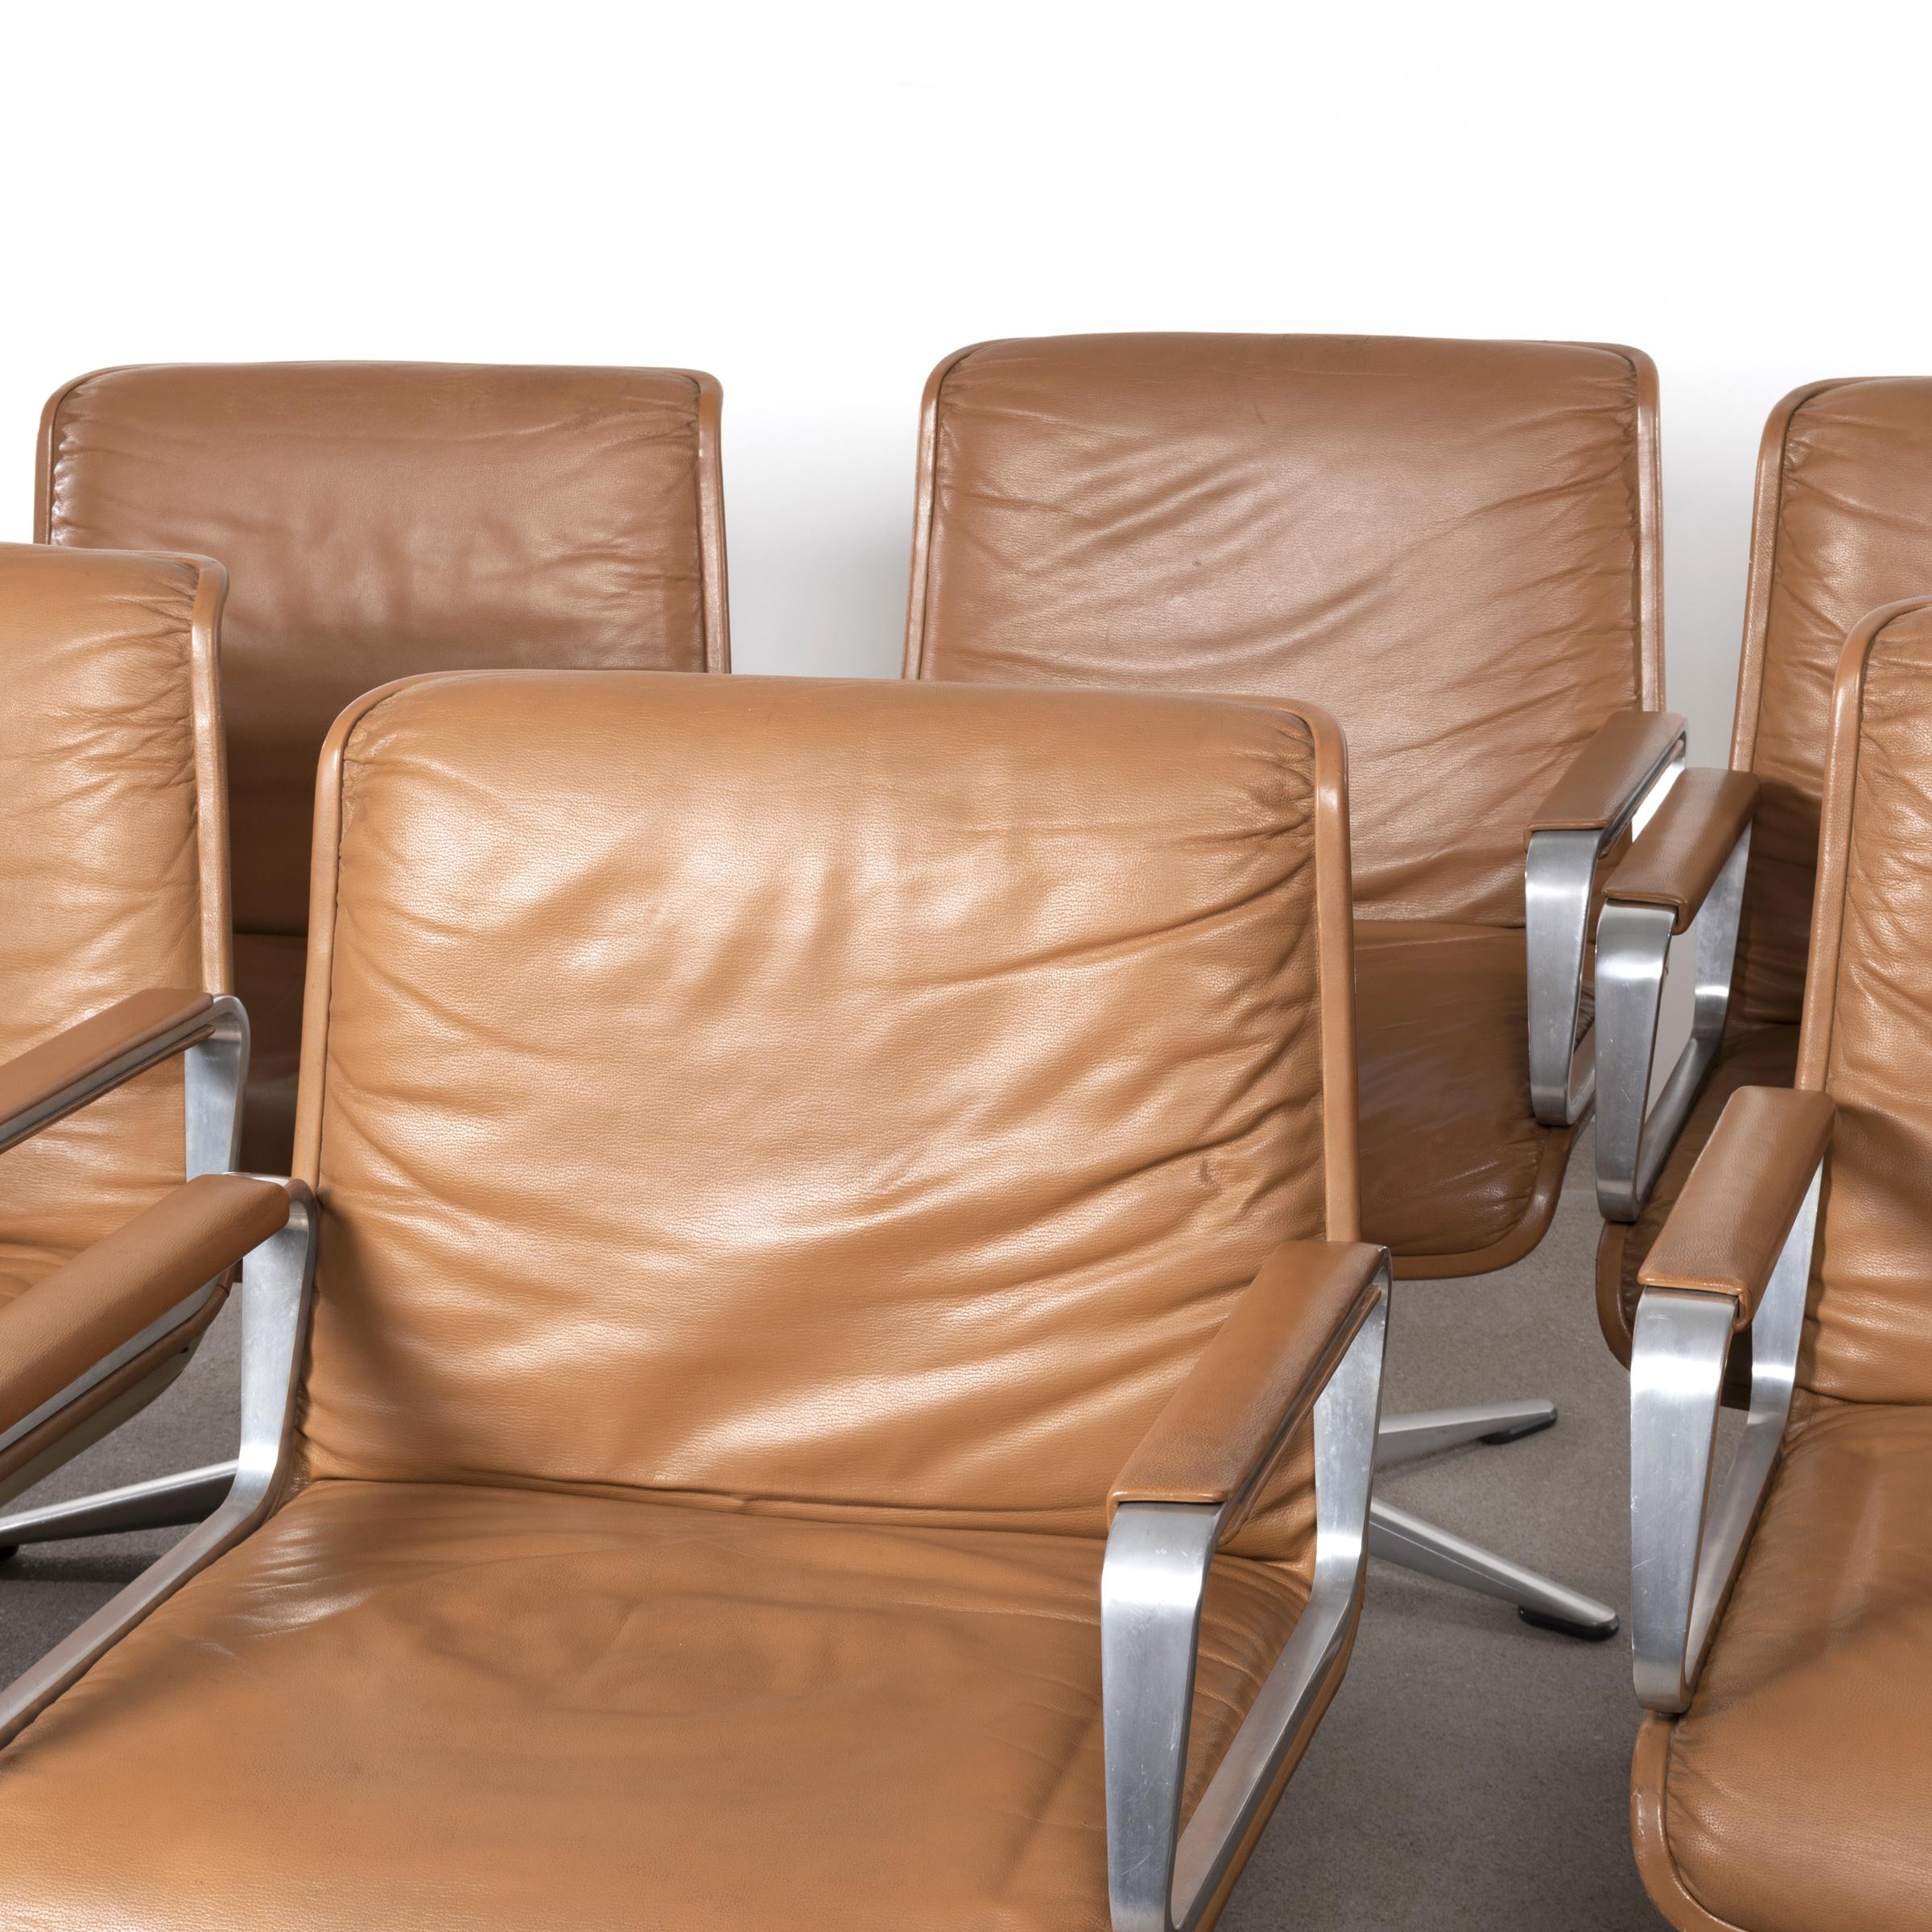 Mid-20th Century Delta Design Program 2000 Soft Pad Chairs in Cognac Leather for Wilkhahn, 1968